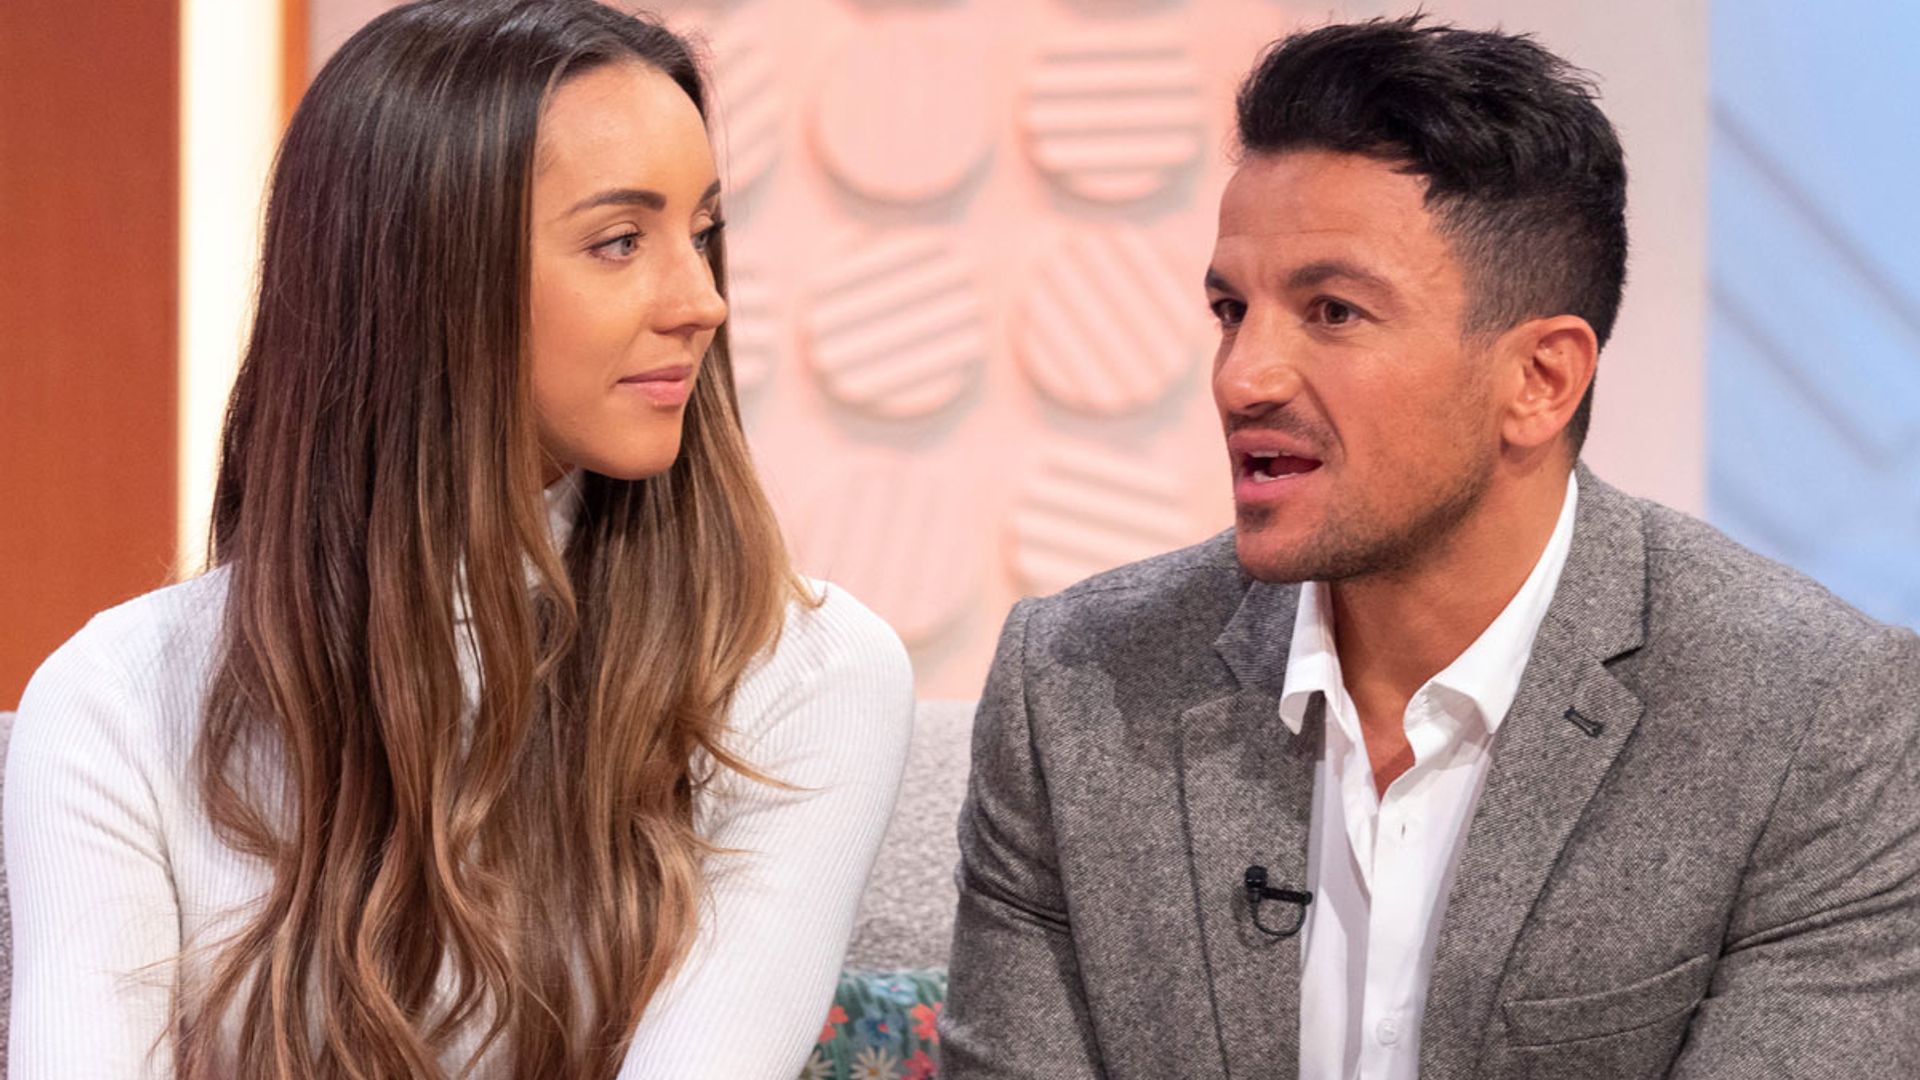 Peter Andre and wife Emily unveil daughter Amelia's special birthday cake after Katie Price rant